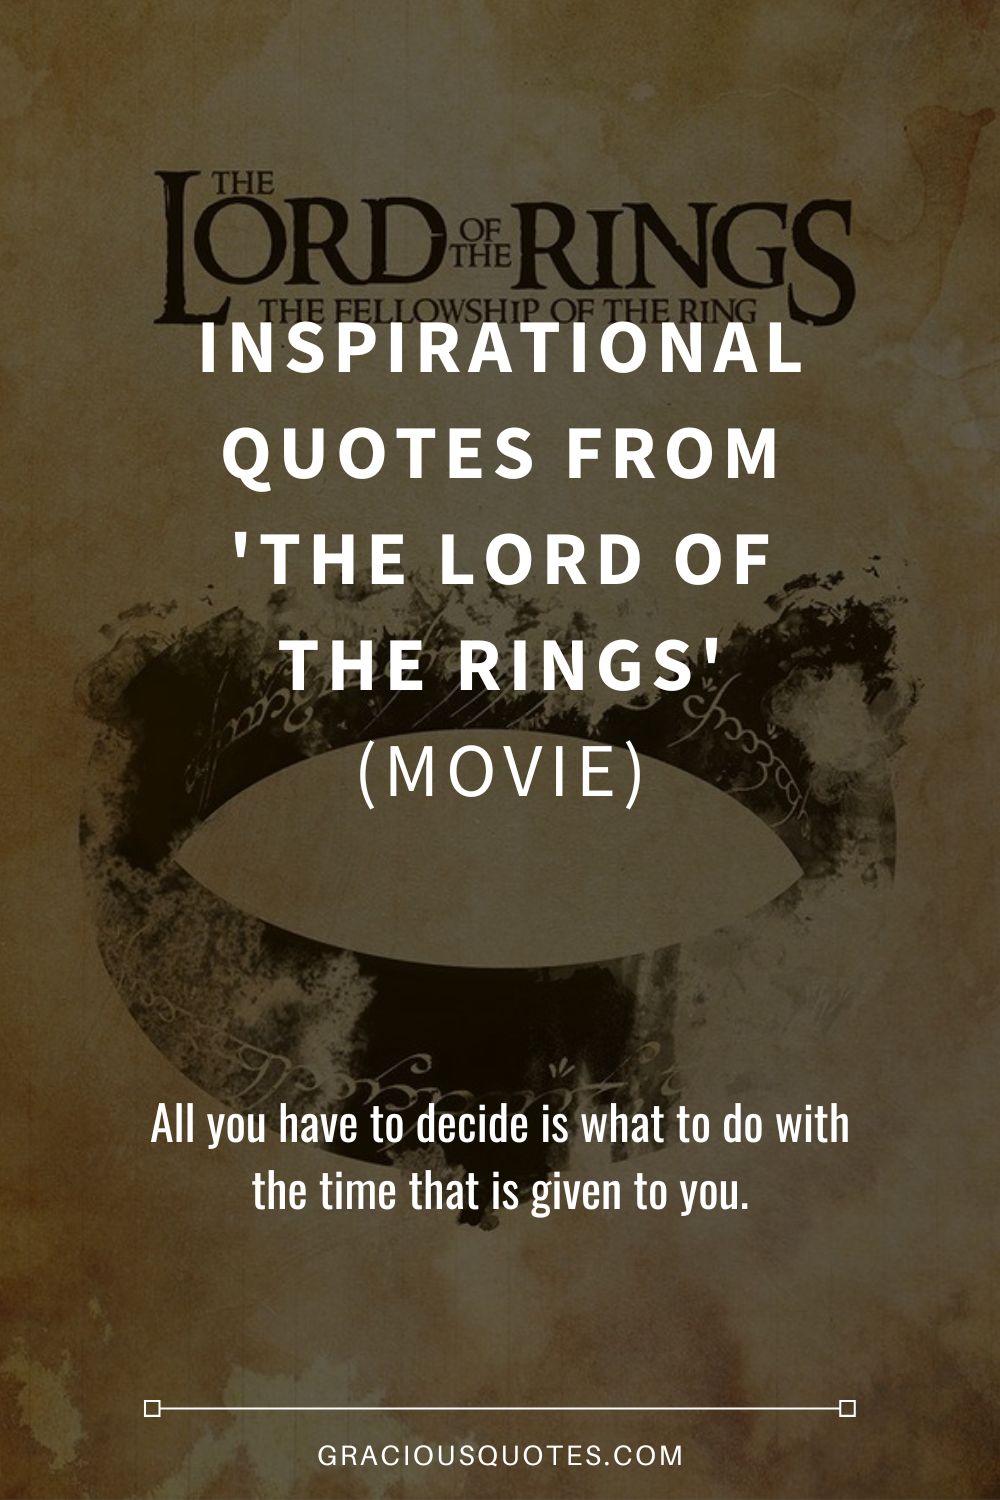 Lord of the Rings Quotes That Will Inspire You - Media Chomp